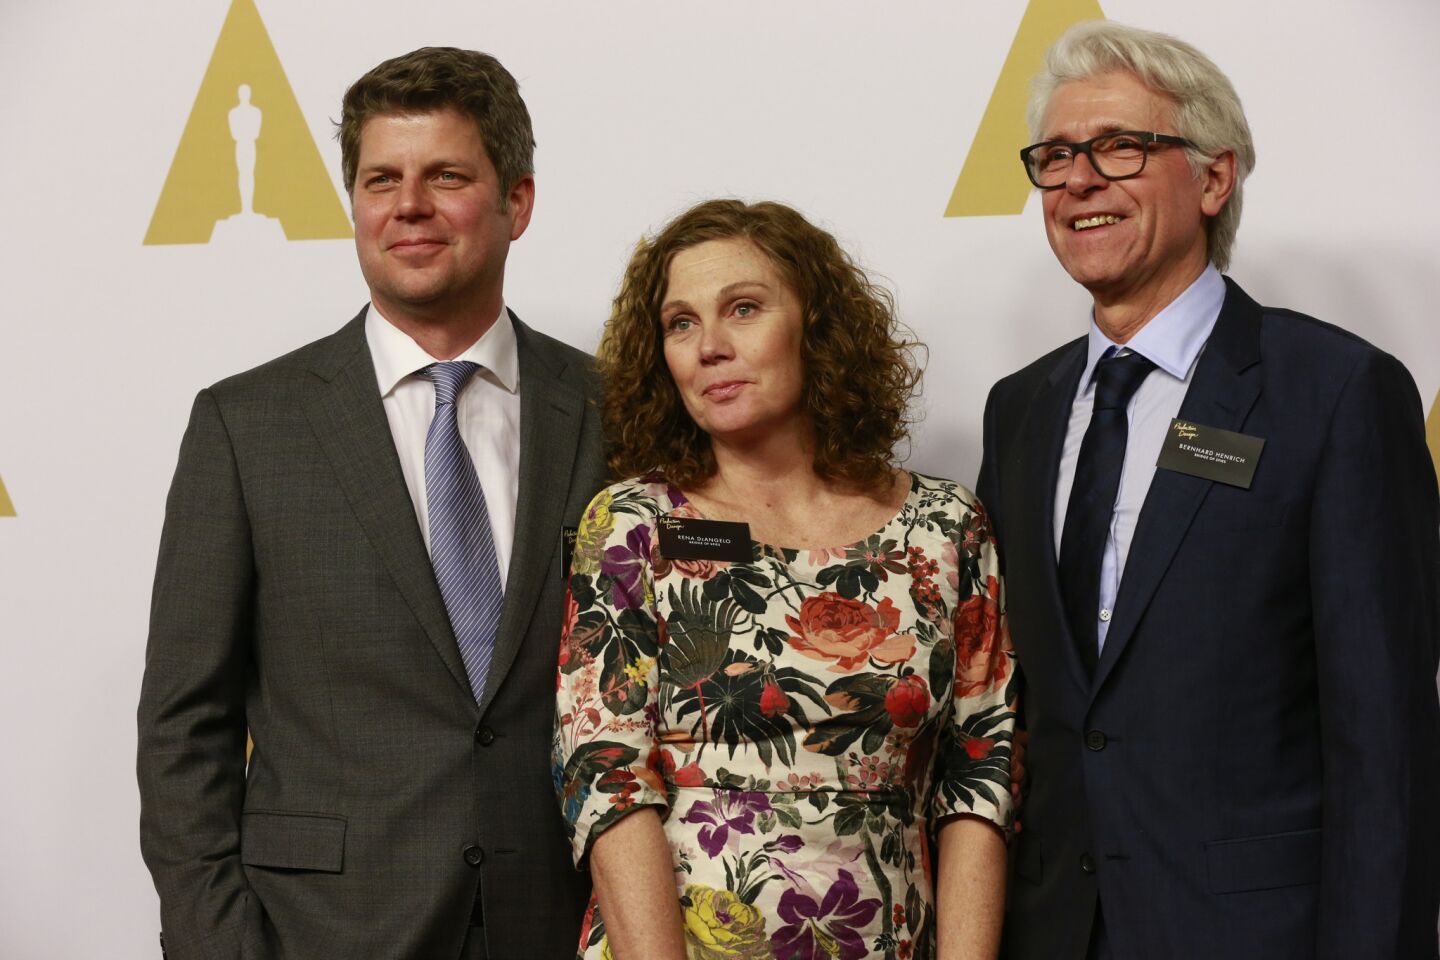 Adam Stockhausen, left, Rena DeAngelo, and Bernhard Henrick arrive for the 88th annual Academy Awards luncheon at the Beverly Hilton Hotel.